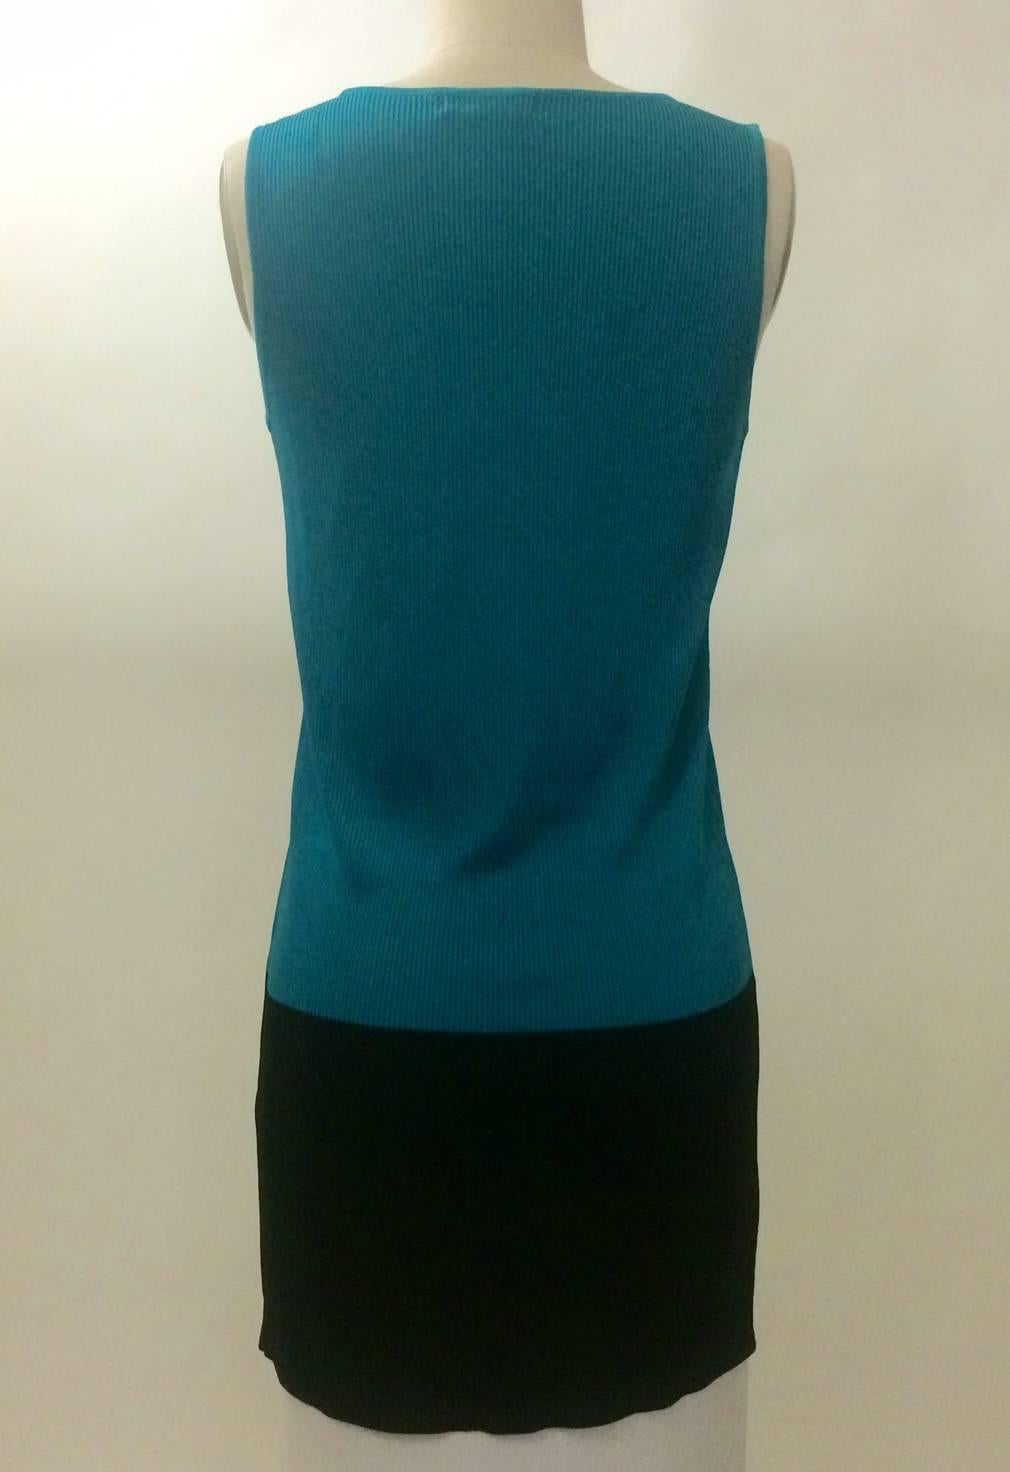 Issey Miyake 1990s teal blue and black rib knit sweater tank dress with scoop neck. 

100% acrylic.

Made in Japan.

Size XS. (Stretchy, measurements taken unstretched.)
Bust 30